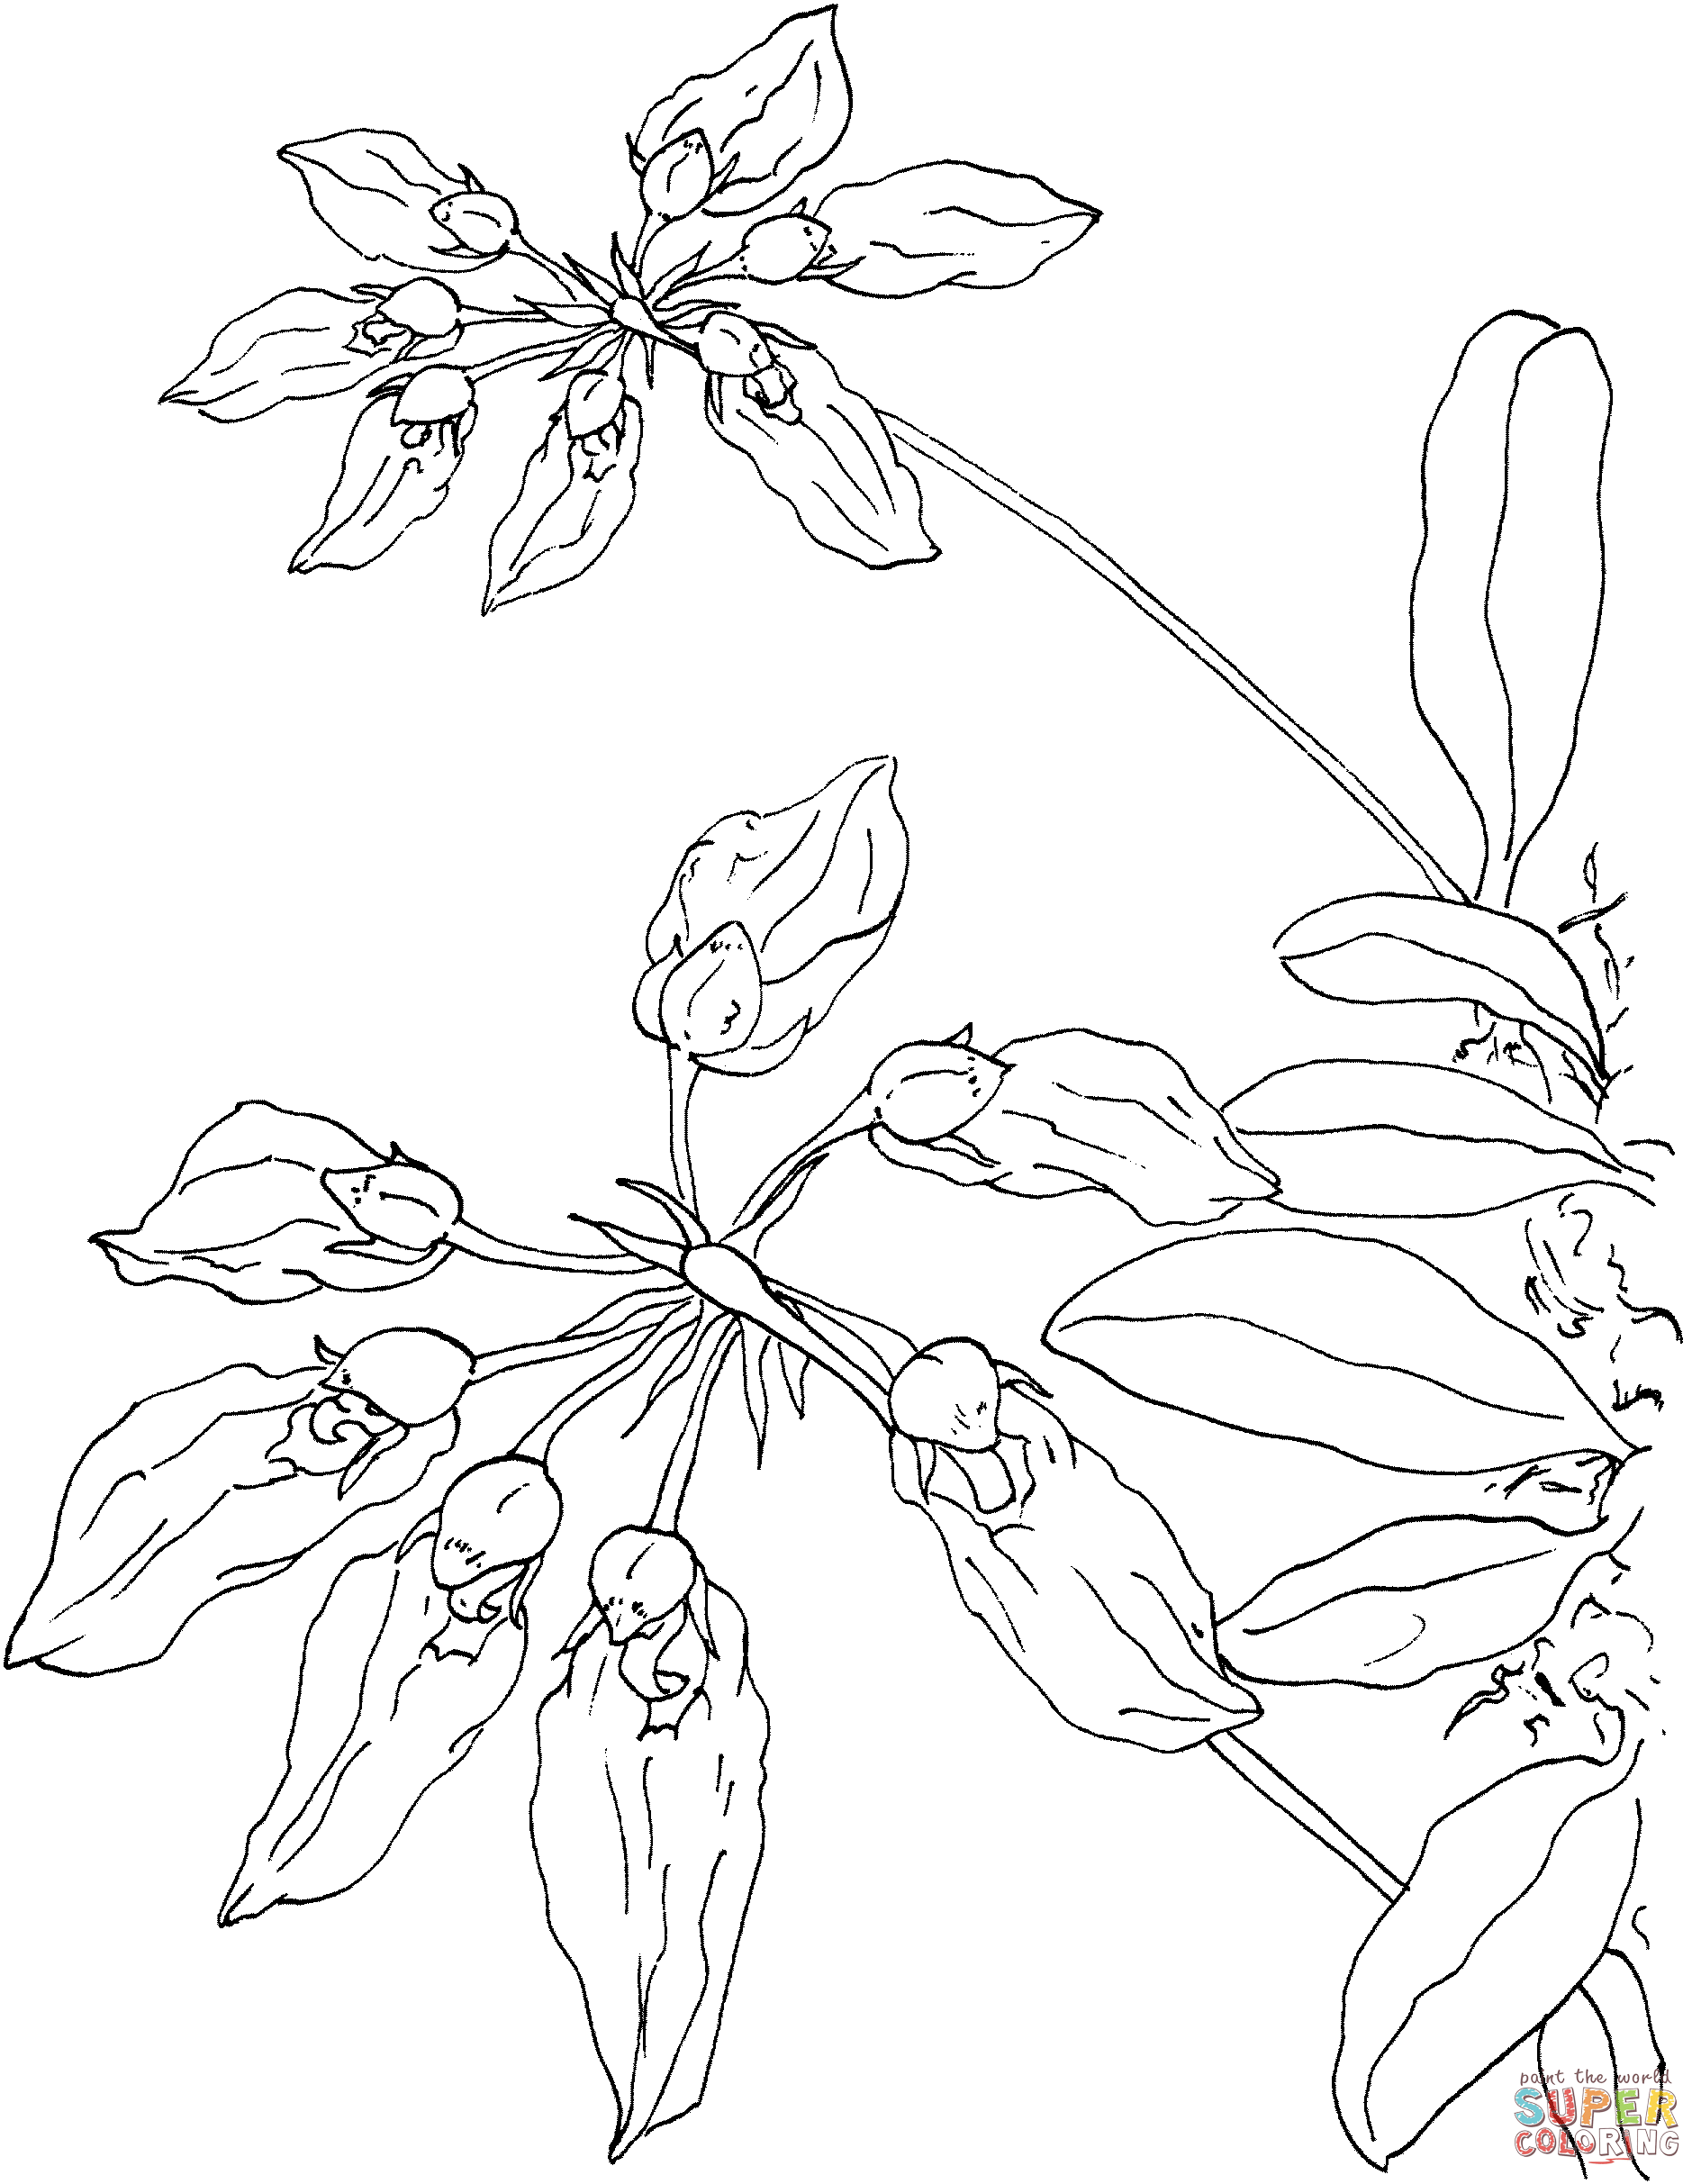 Leopard Orchid coloring #17, Download drawings